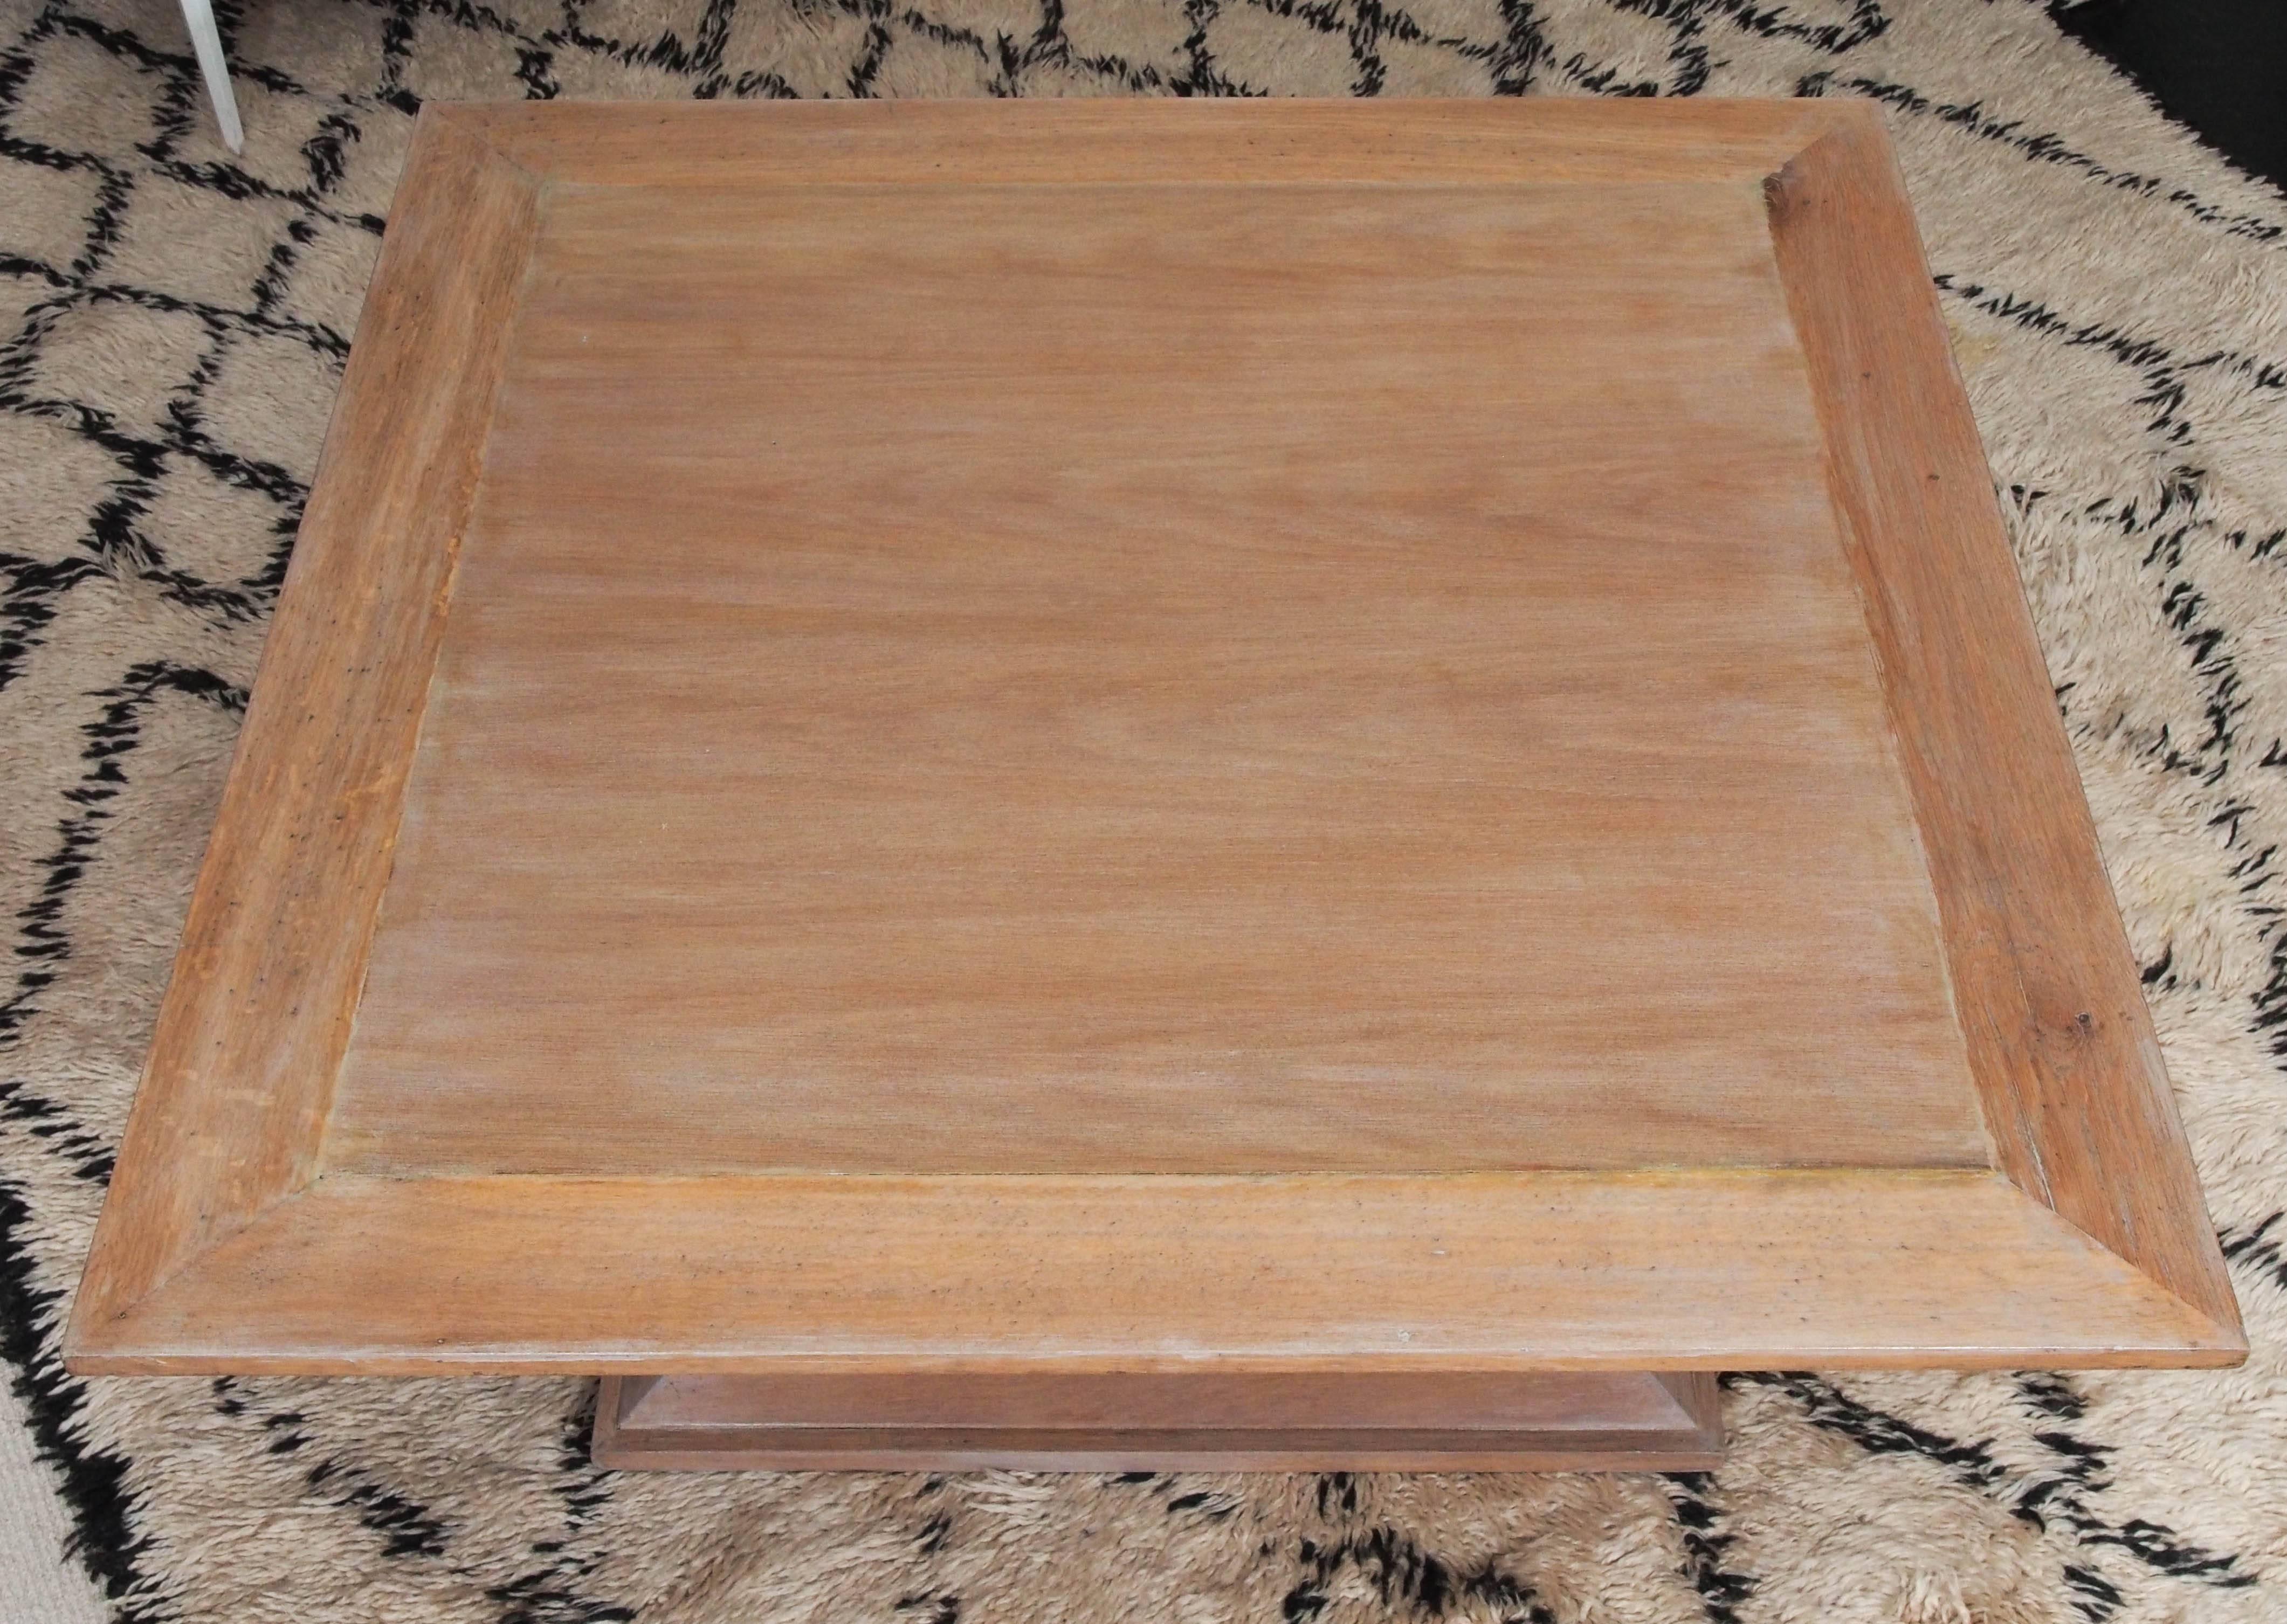 Handsome French 1940s Oak Coffee Table In Excellent Condition For Sale In New Orleans, LA